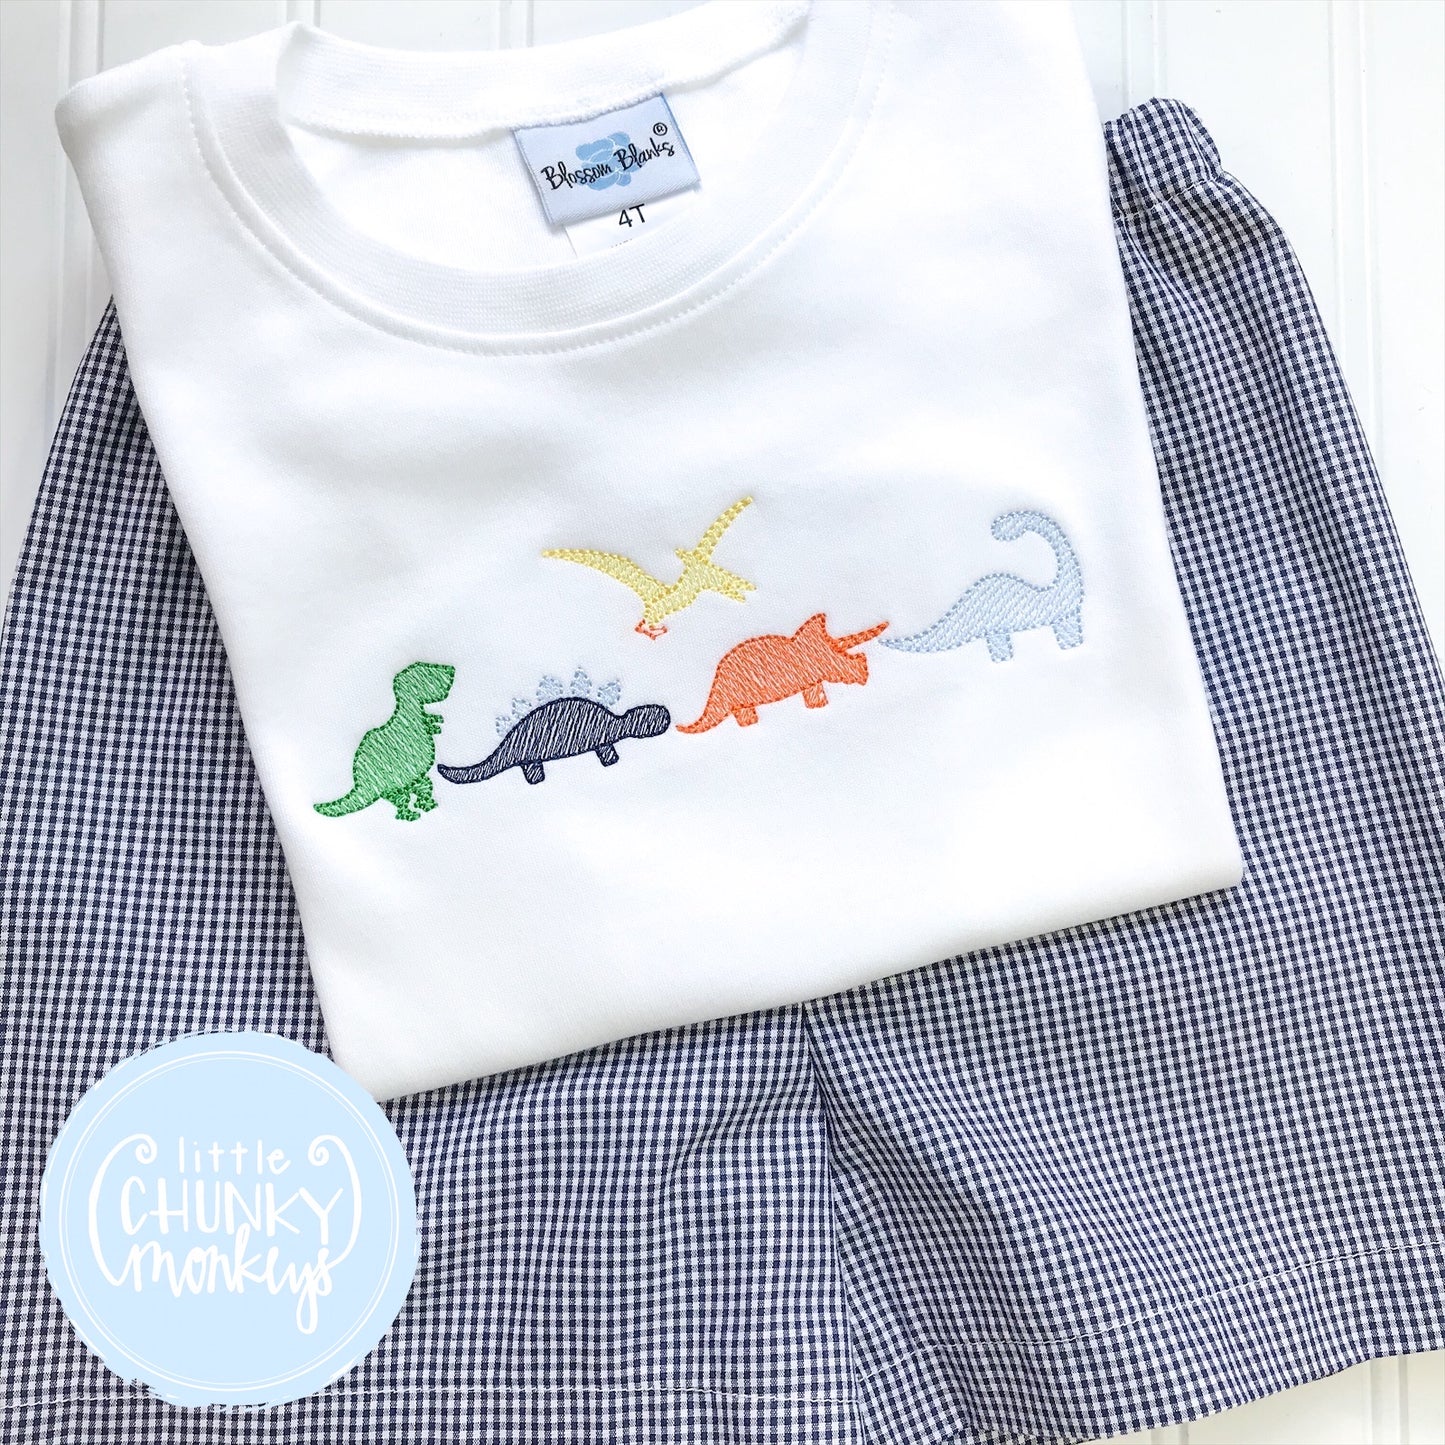 Boy Shirt - Embroidered Dinosaurs